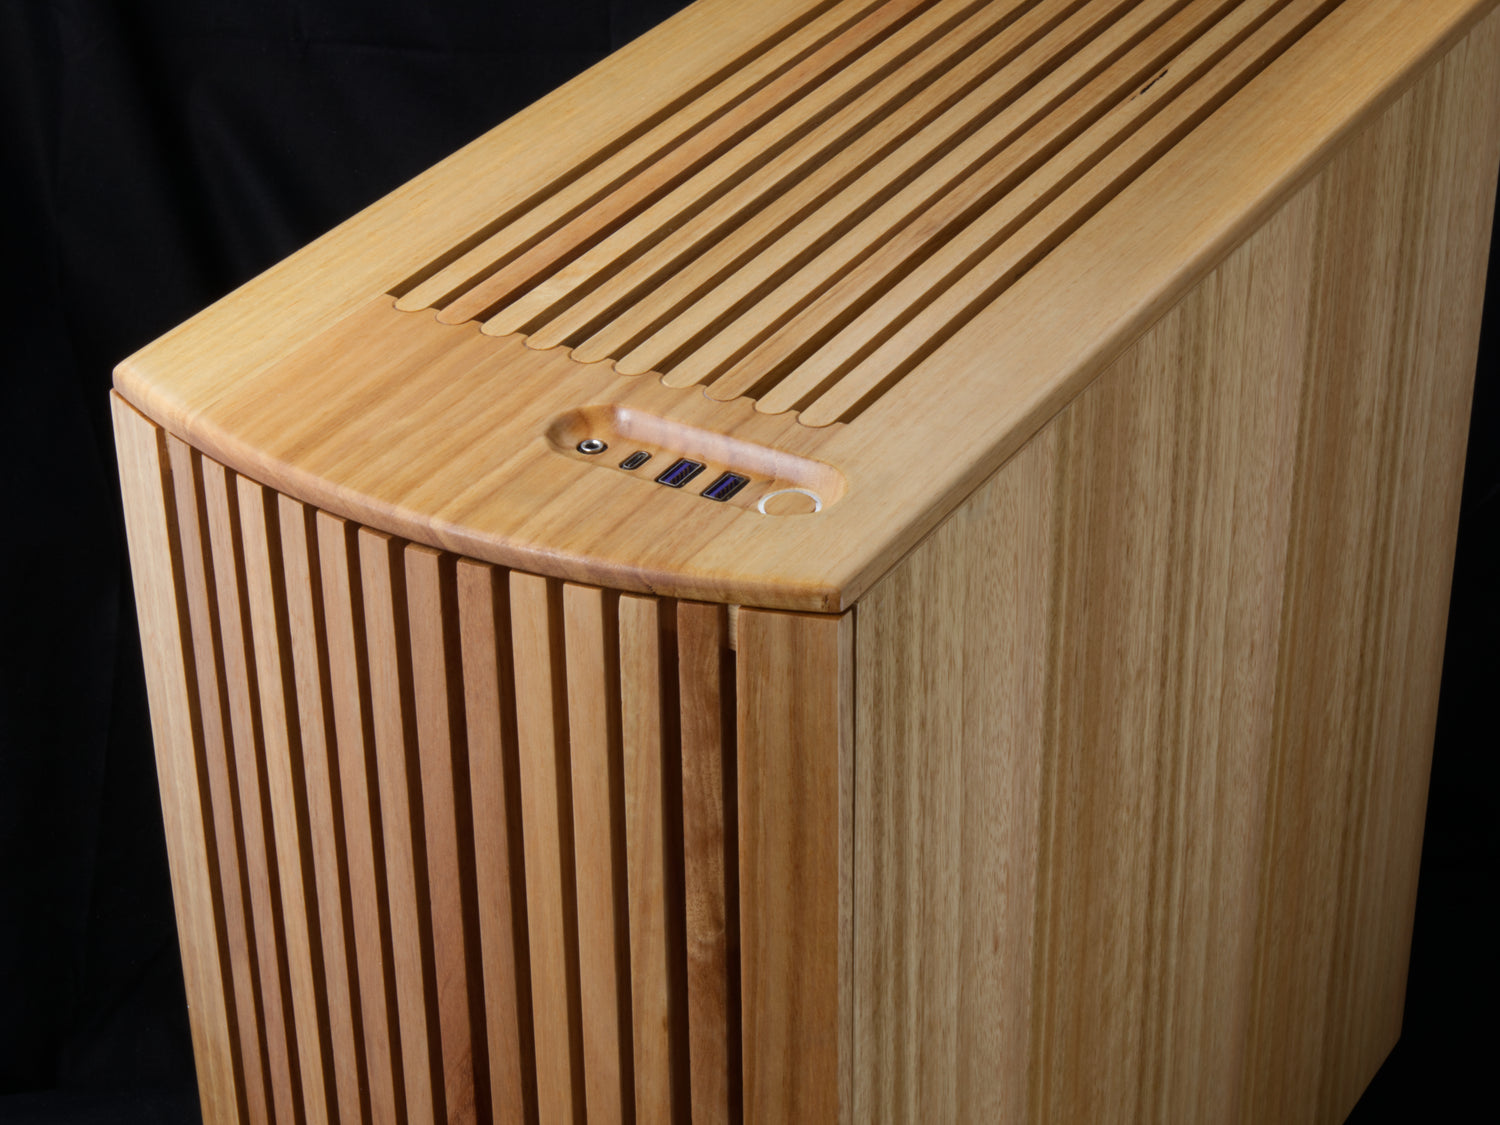 The Genesis case by Woodfort Cases. A PC case made with Tasmanian Oak wooden panels giving the case a beautiful, bright, straw coloured appearance. 